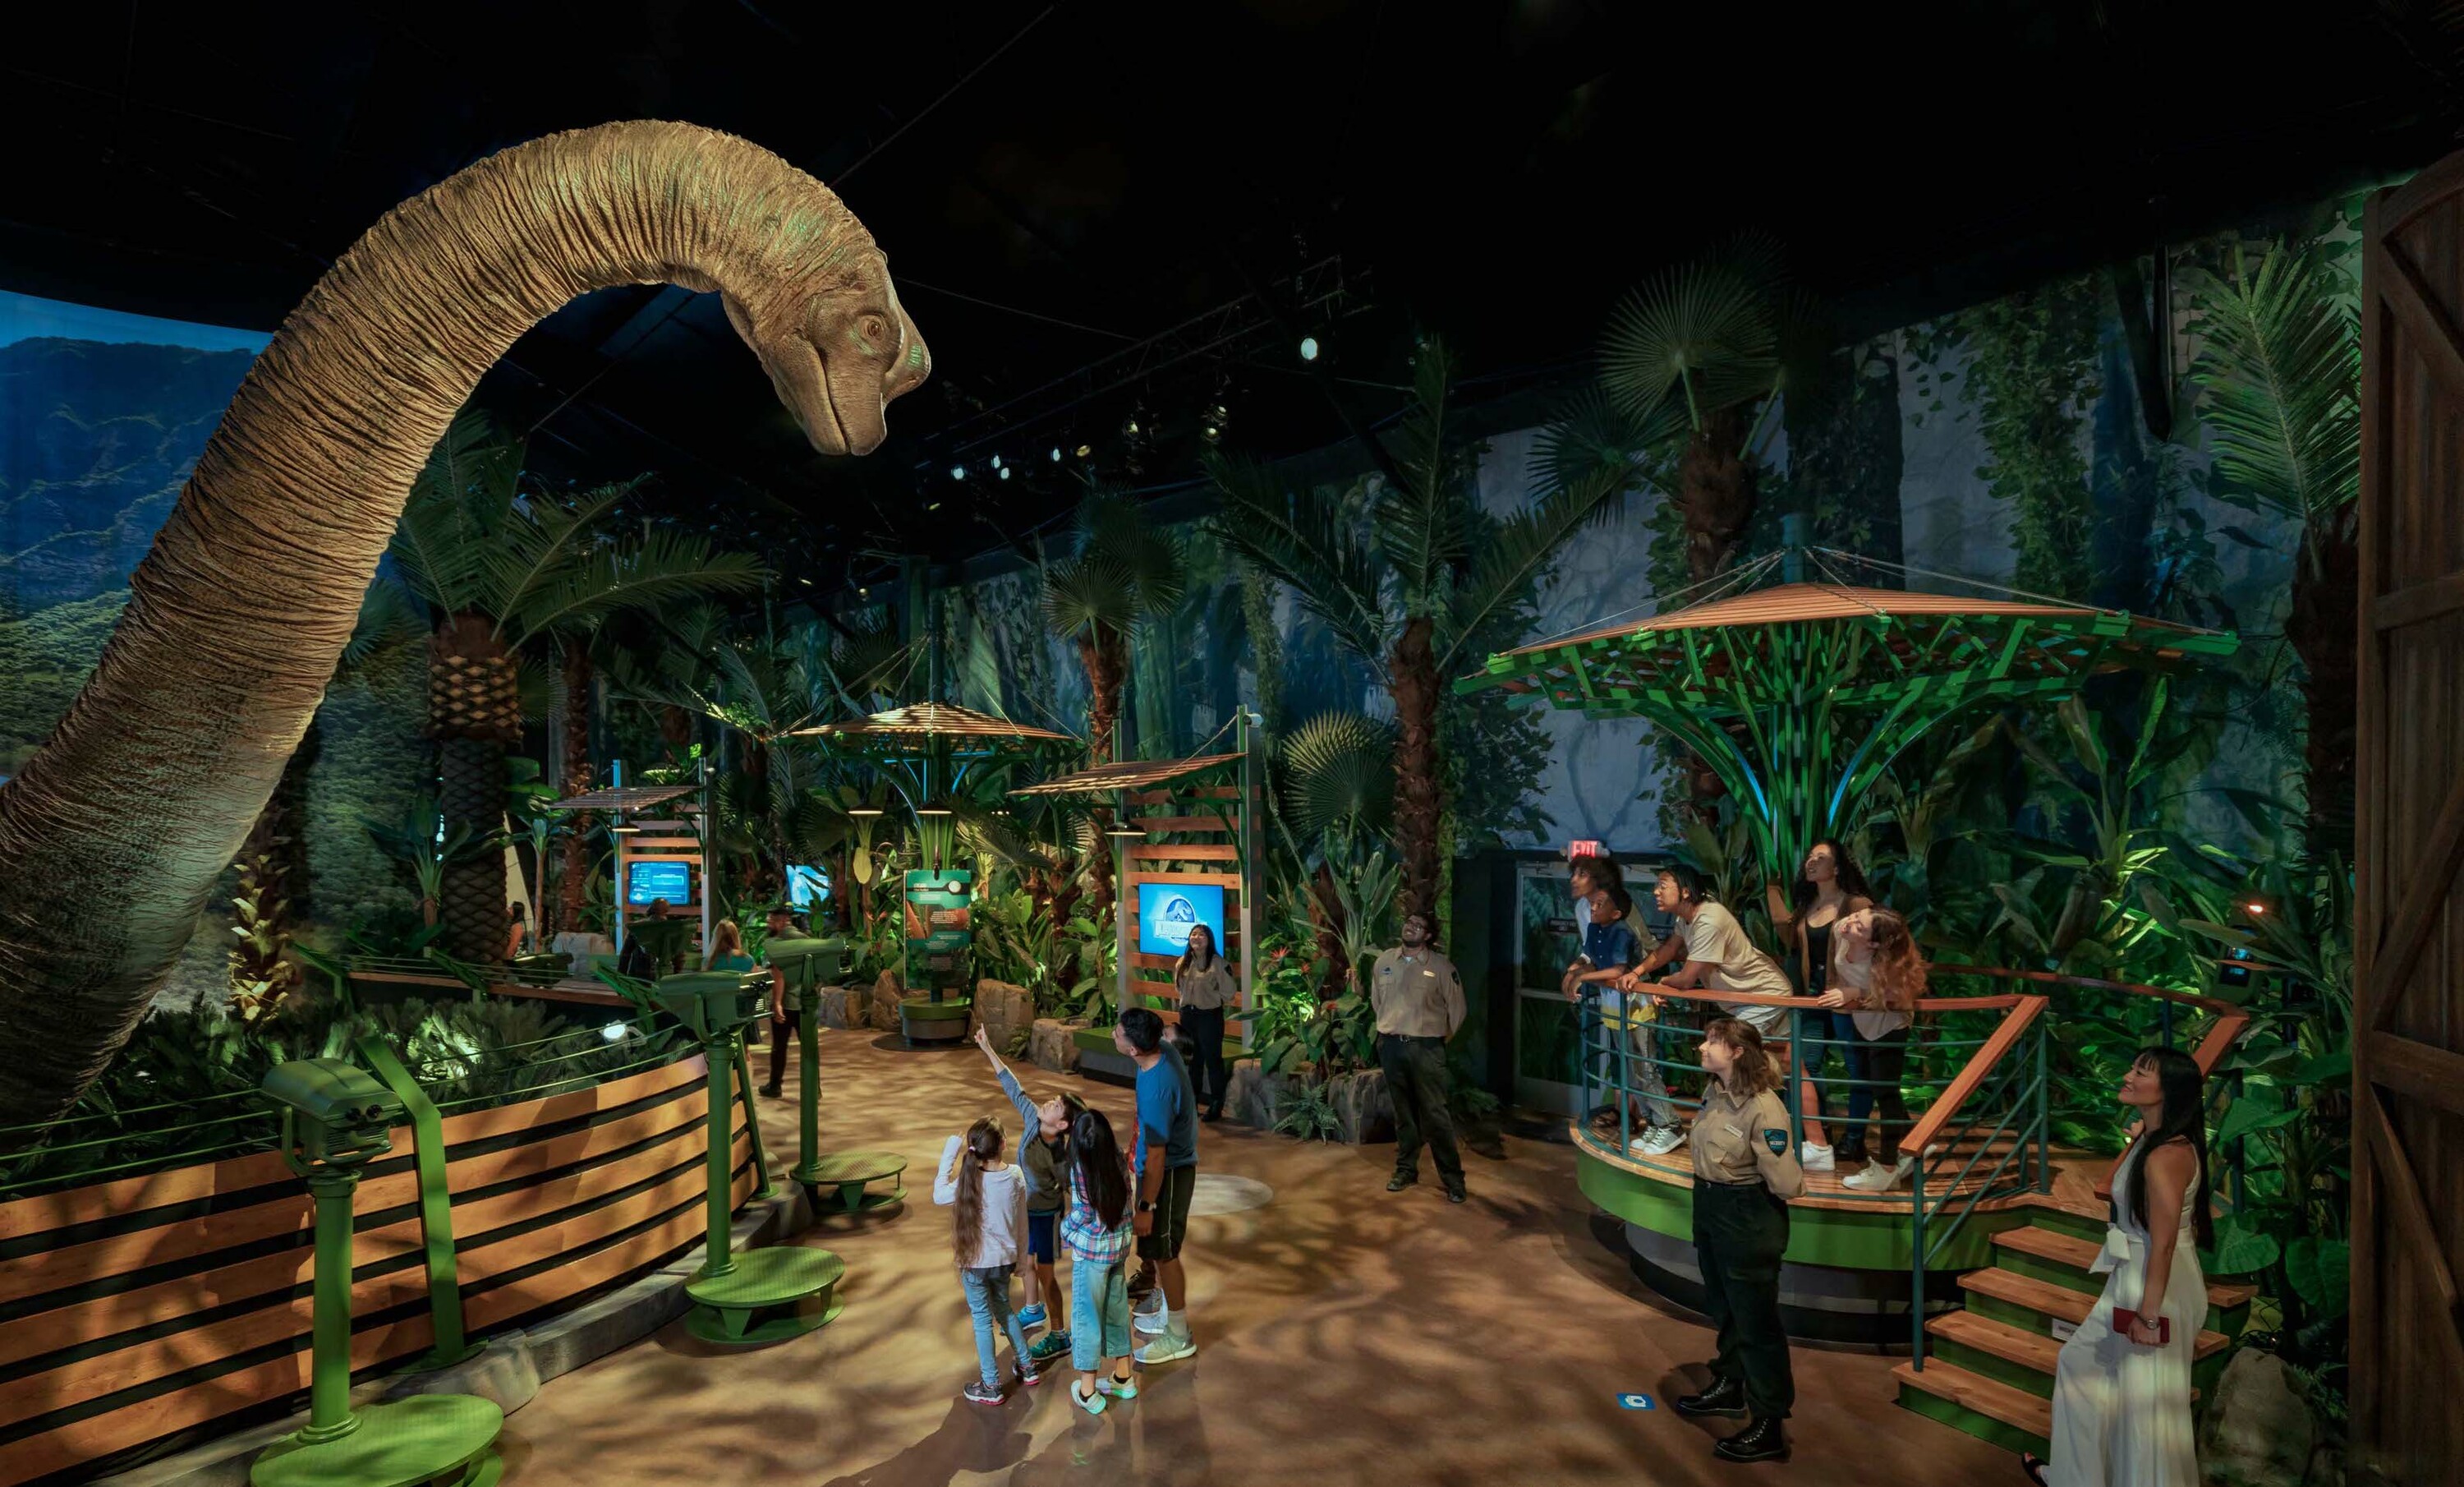 The official Jurassic World exhibition is opening in Tokyo in 2023